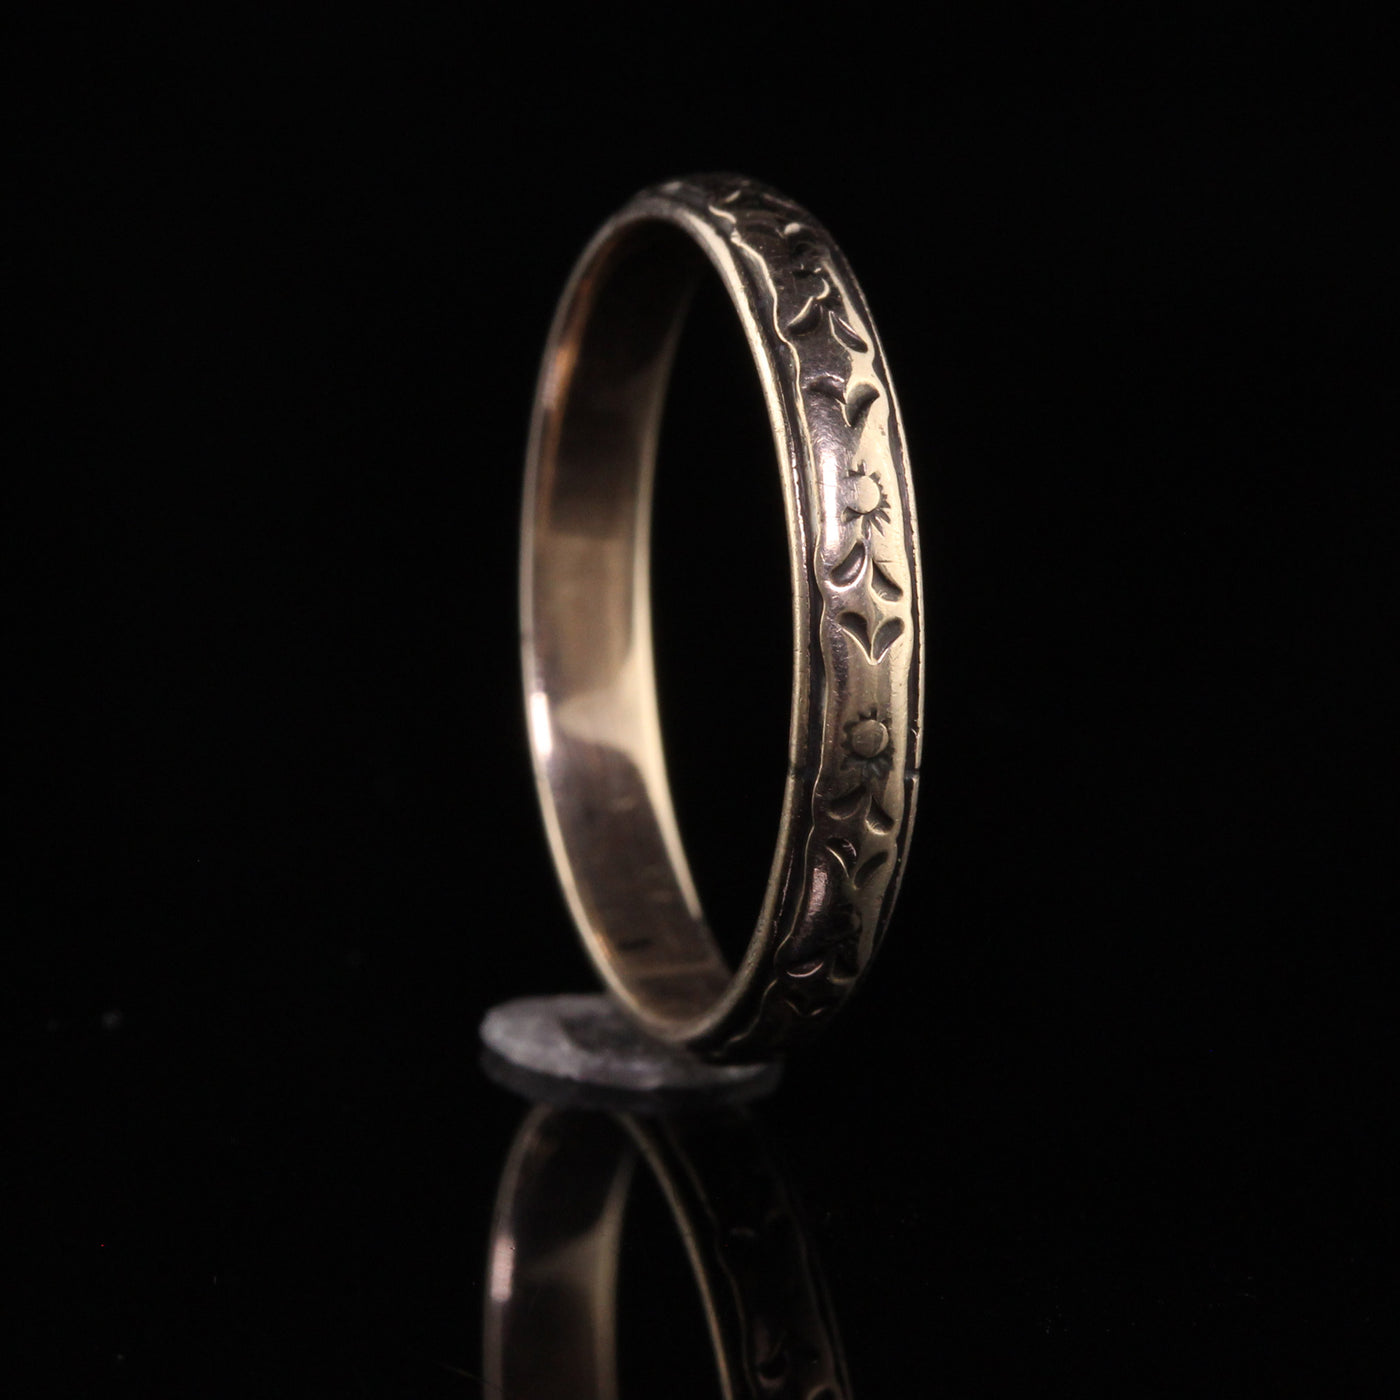 Antique Art Deco 10K Yellow Gold Engraved Wedding Band - Size 6 1/4